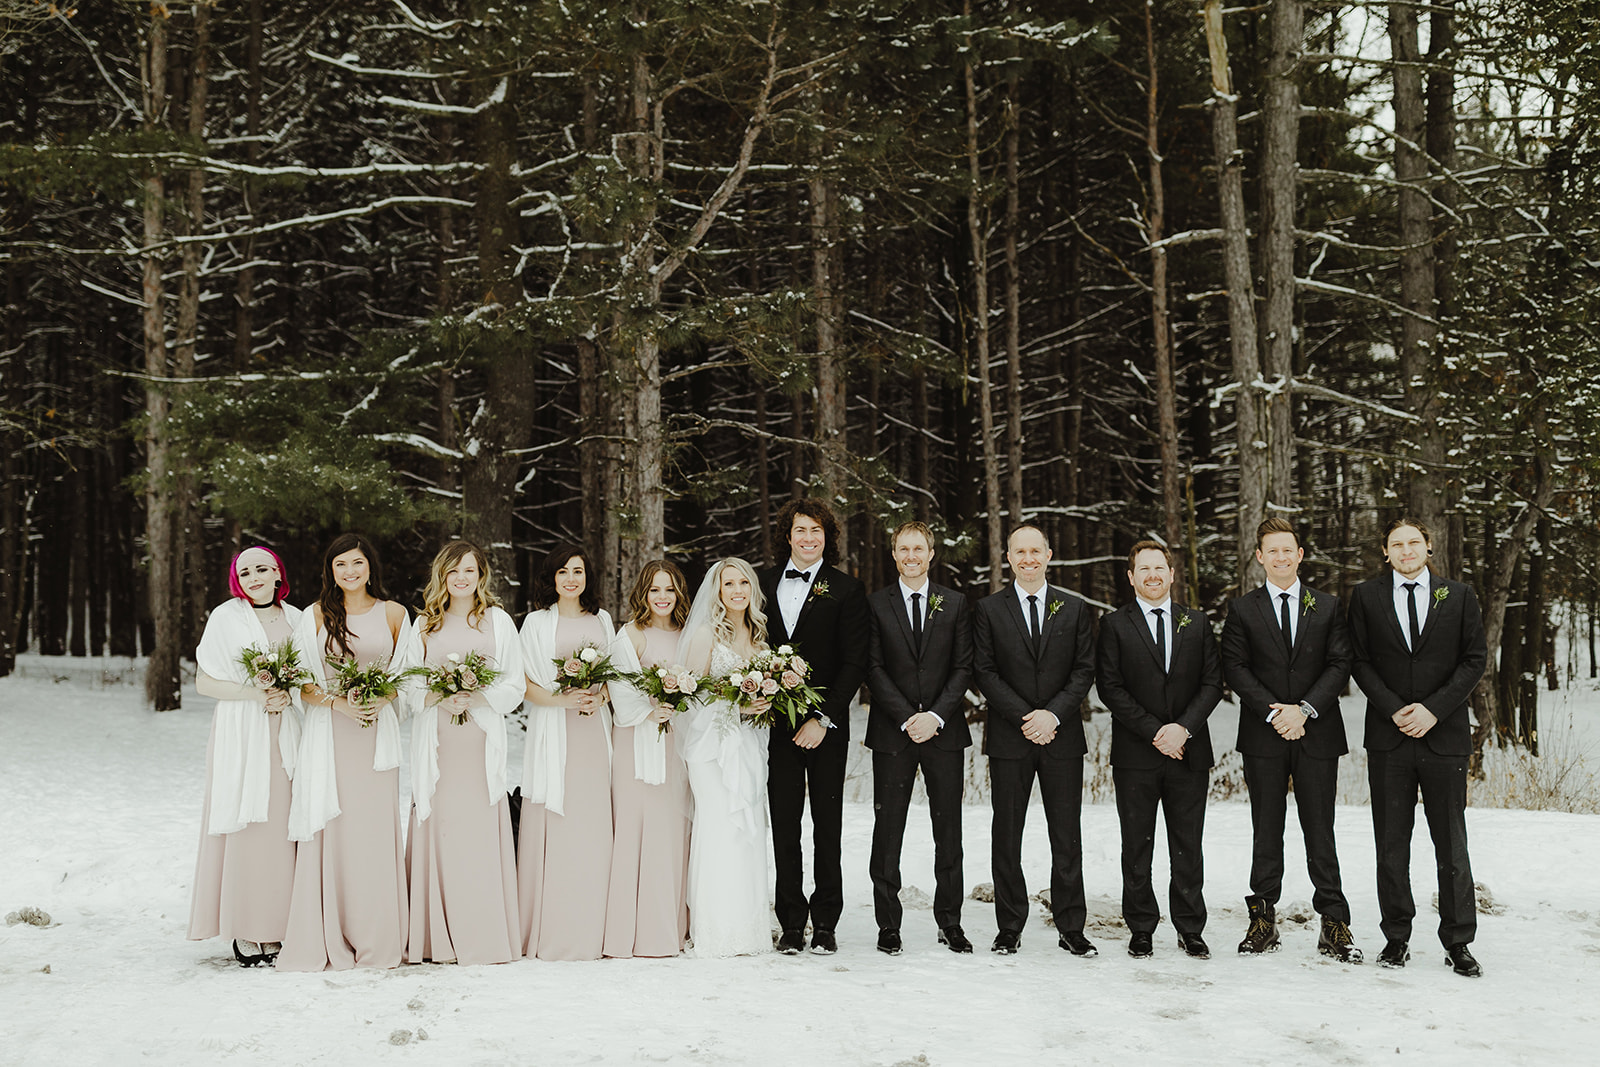 A wedding party smiling outside on a snowy Grand Rapids, Michigan day